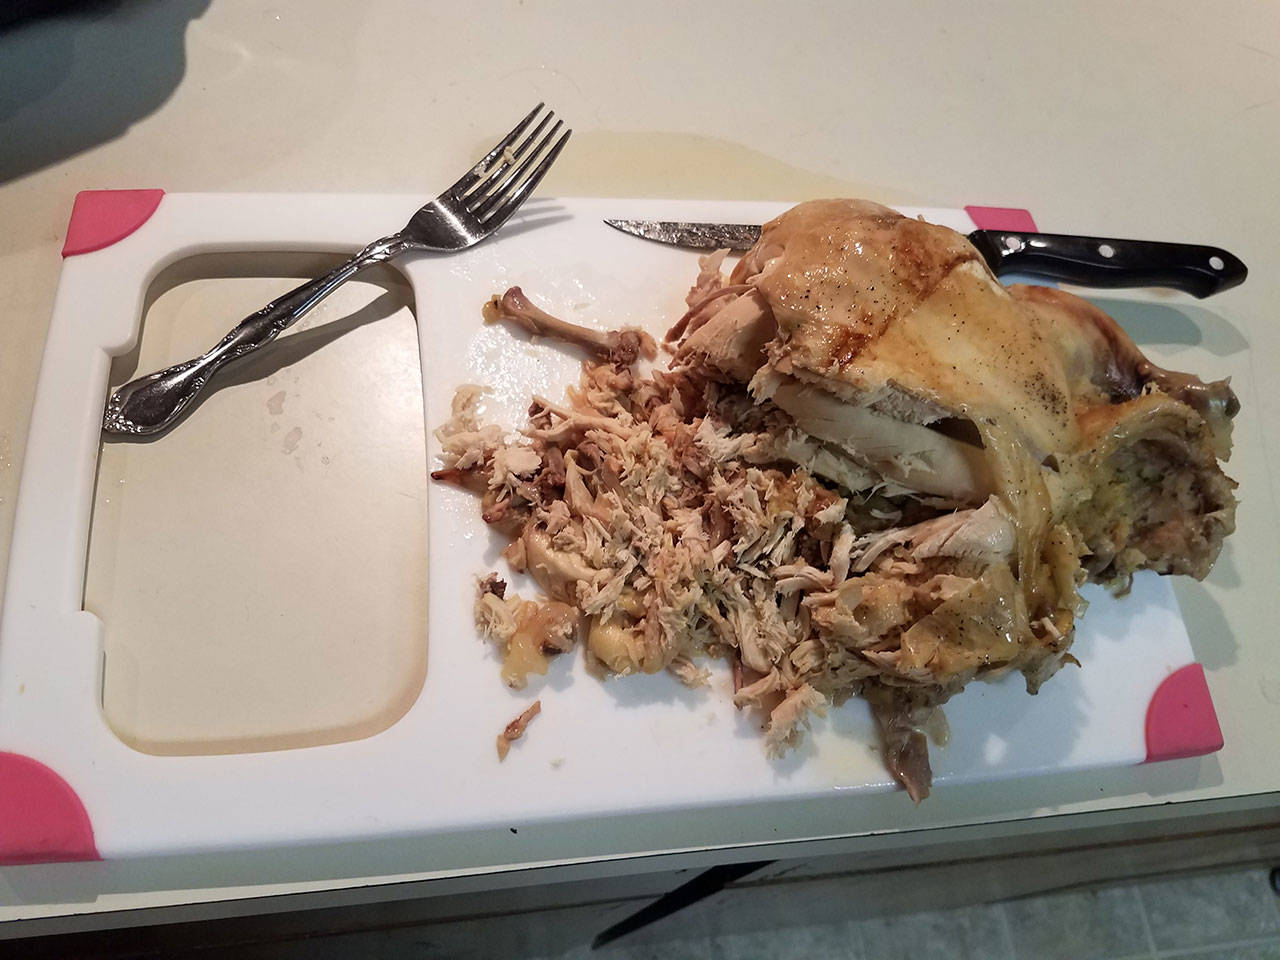 The meat fell right off the bone of the busy woman’s roast chicken. (Emily Hanson/Peninsula Daily News)